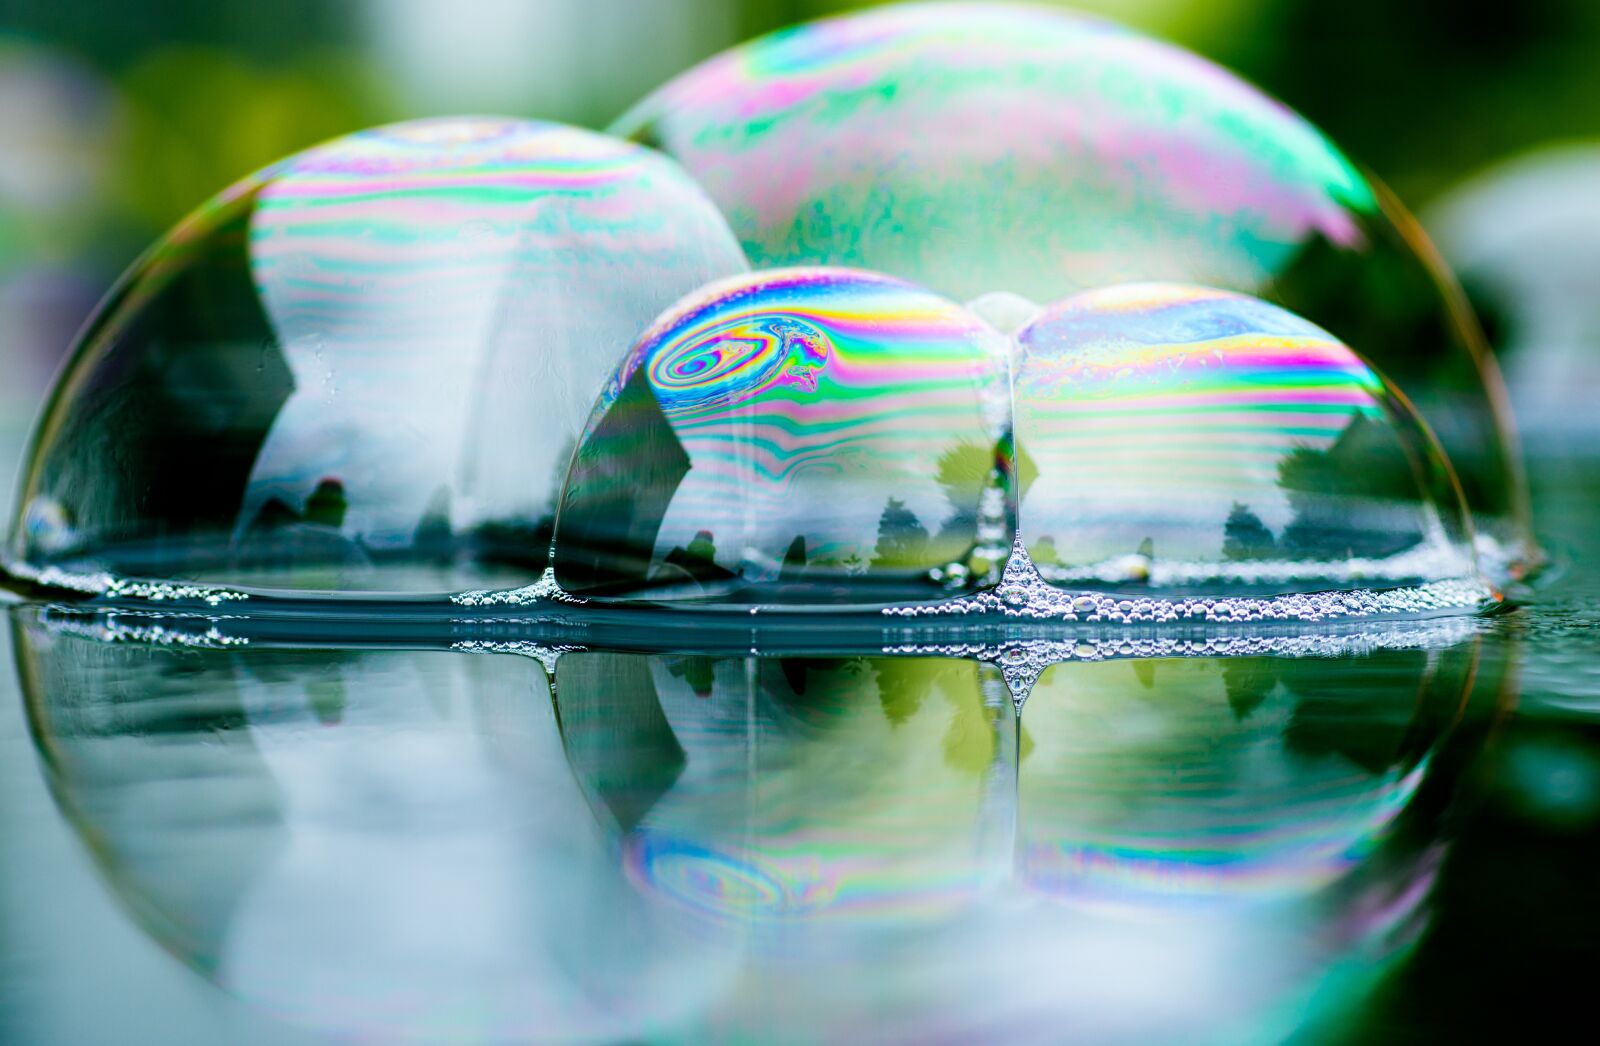 Pentax KP sample photo. Soap bubbles, mirroring, reflection photography